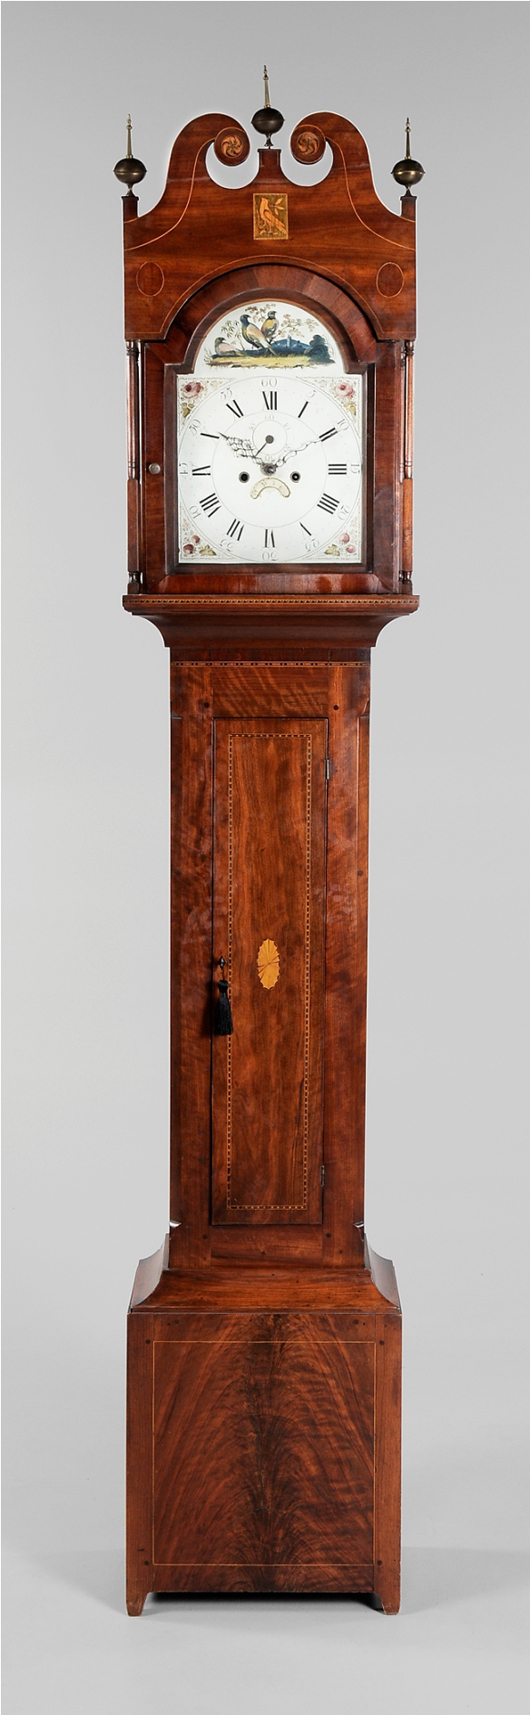 Dating to 1795-1805, this 100 1/2-inch-high case clock from Northern Virginia or Baltimore sold for $16,100 (est. $20,000-$30,000). Look carefully for the proud bird inlaid in the tympanum. Image courtesy of Brunk Auctions.